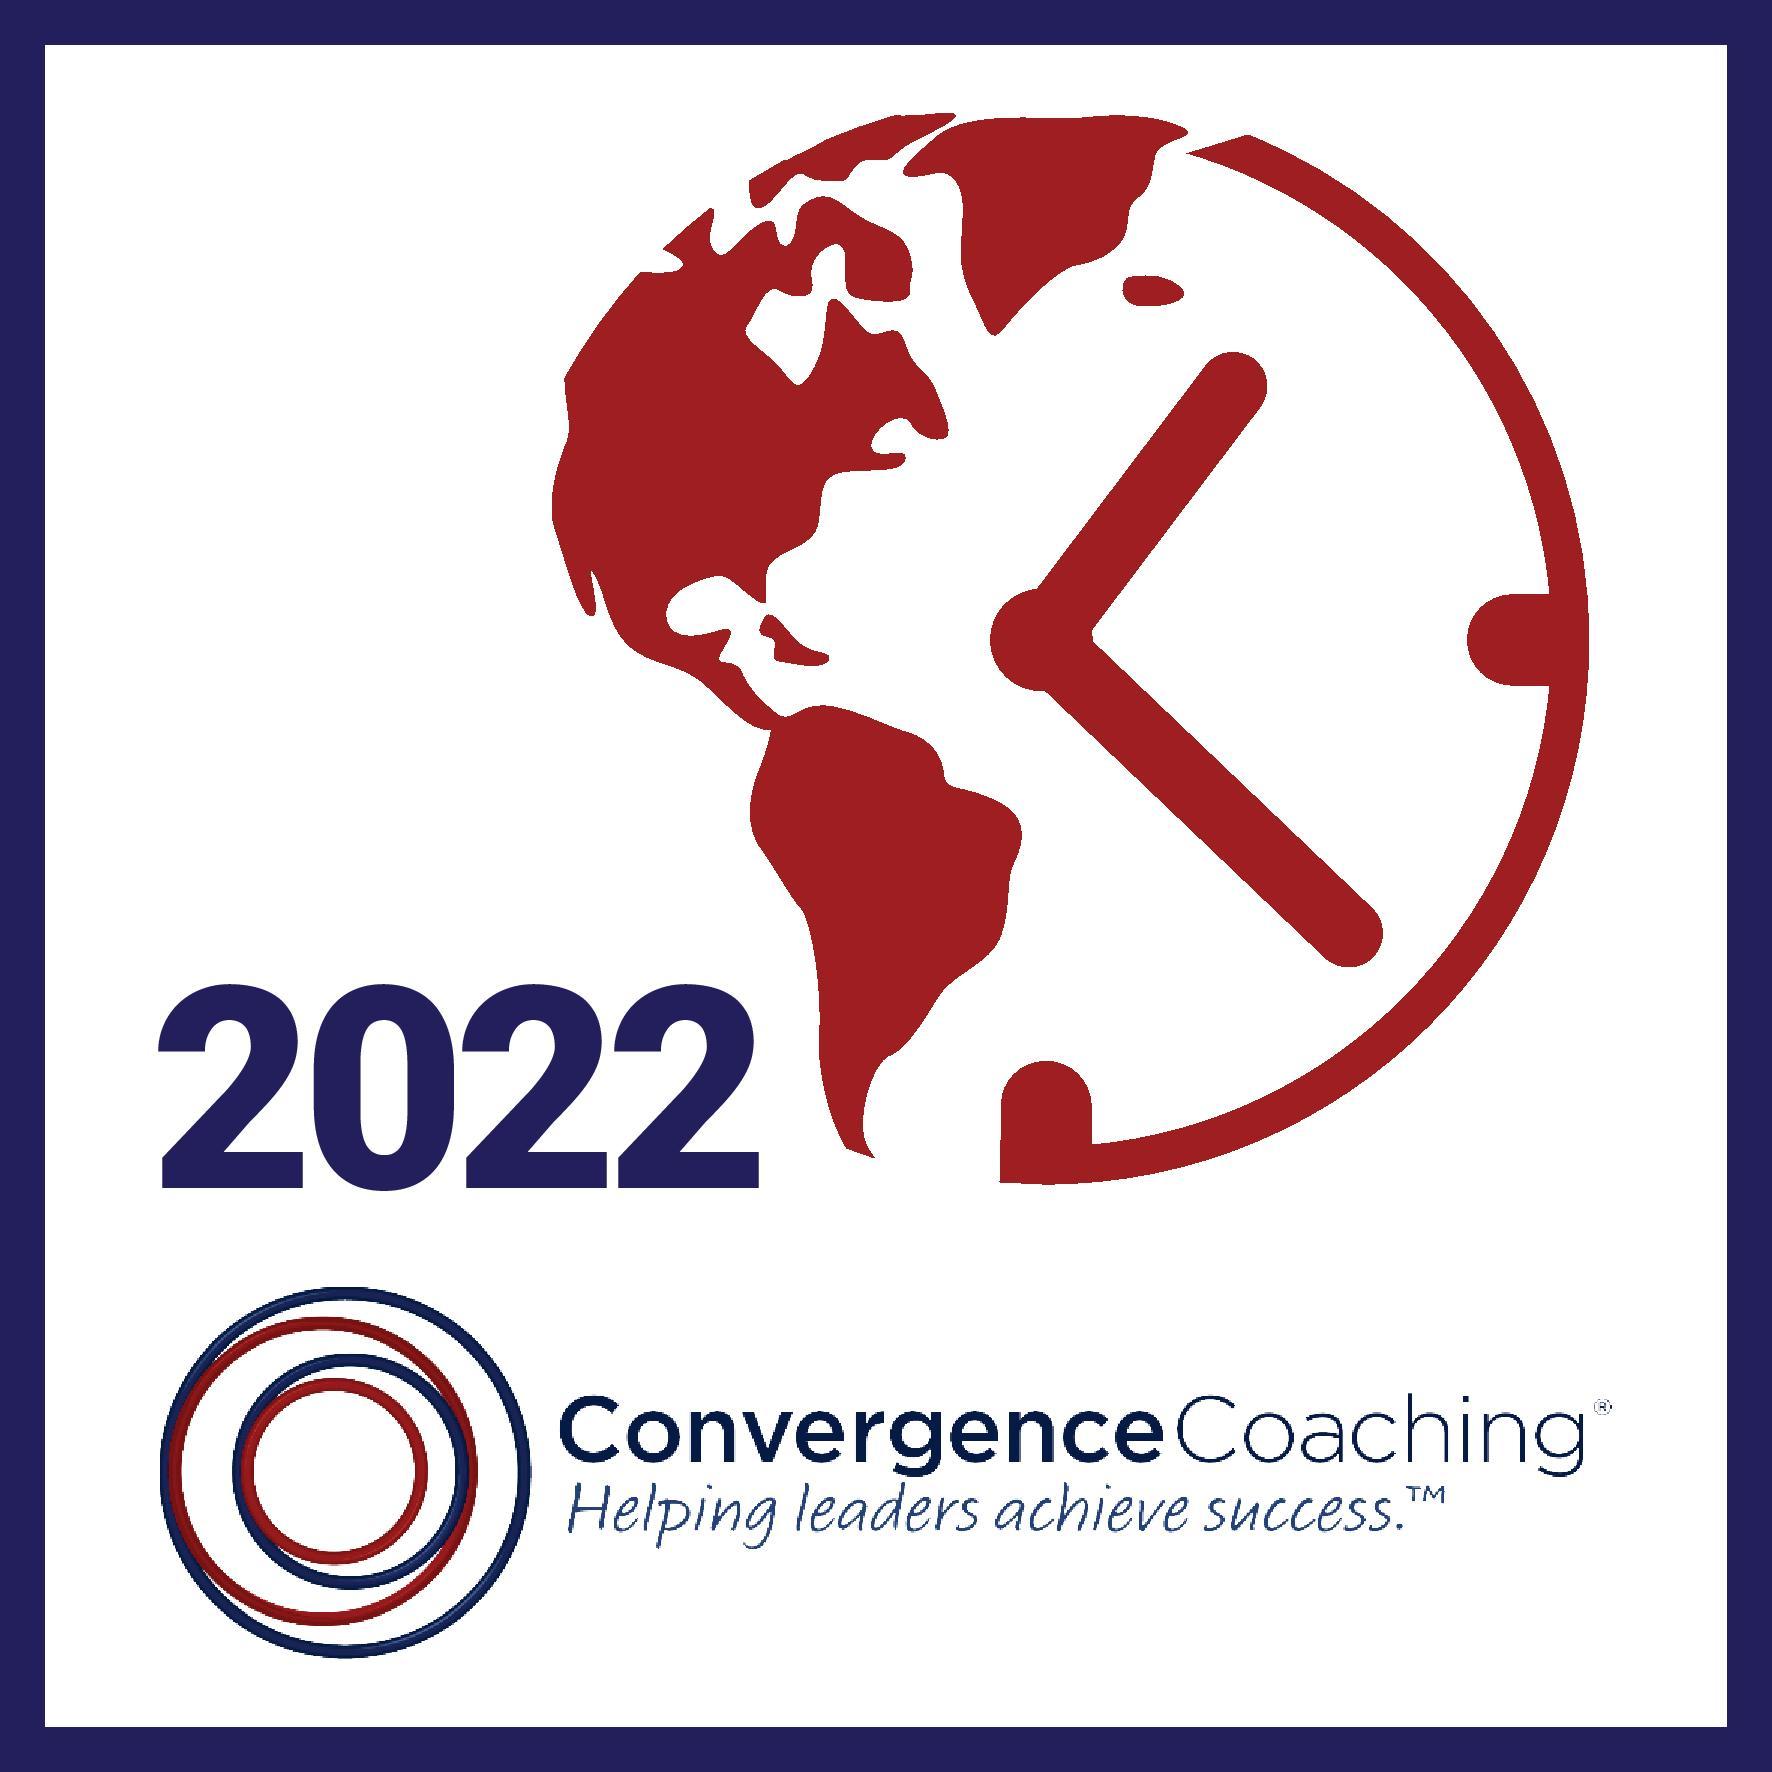 ConvergenceCoaching launches 2024 ‘Anytime, Anywhere Work’ survey